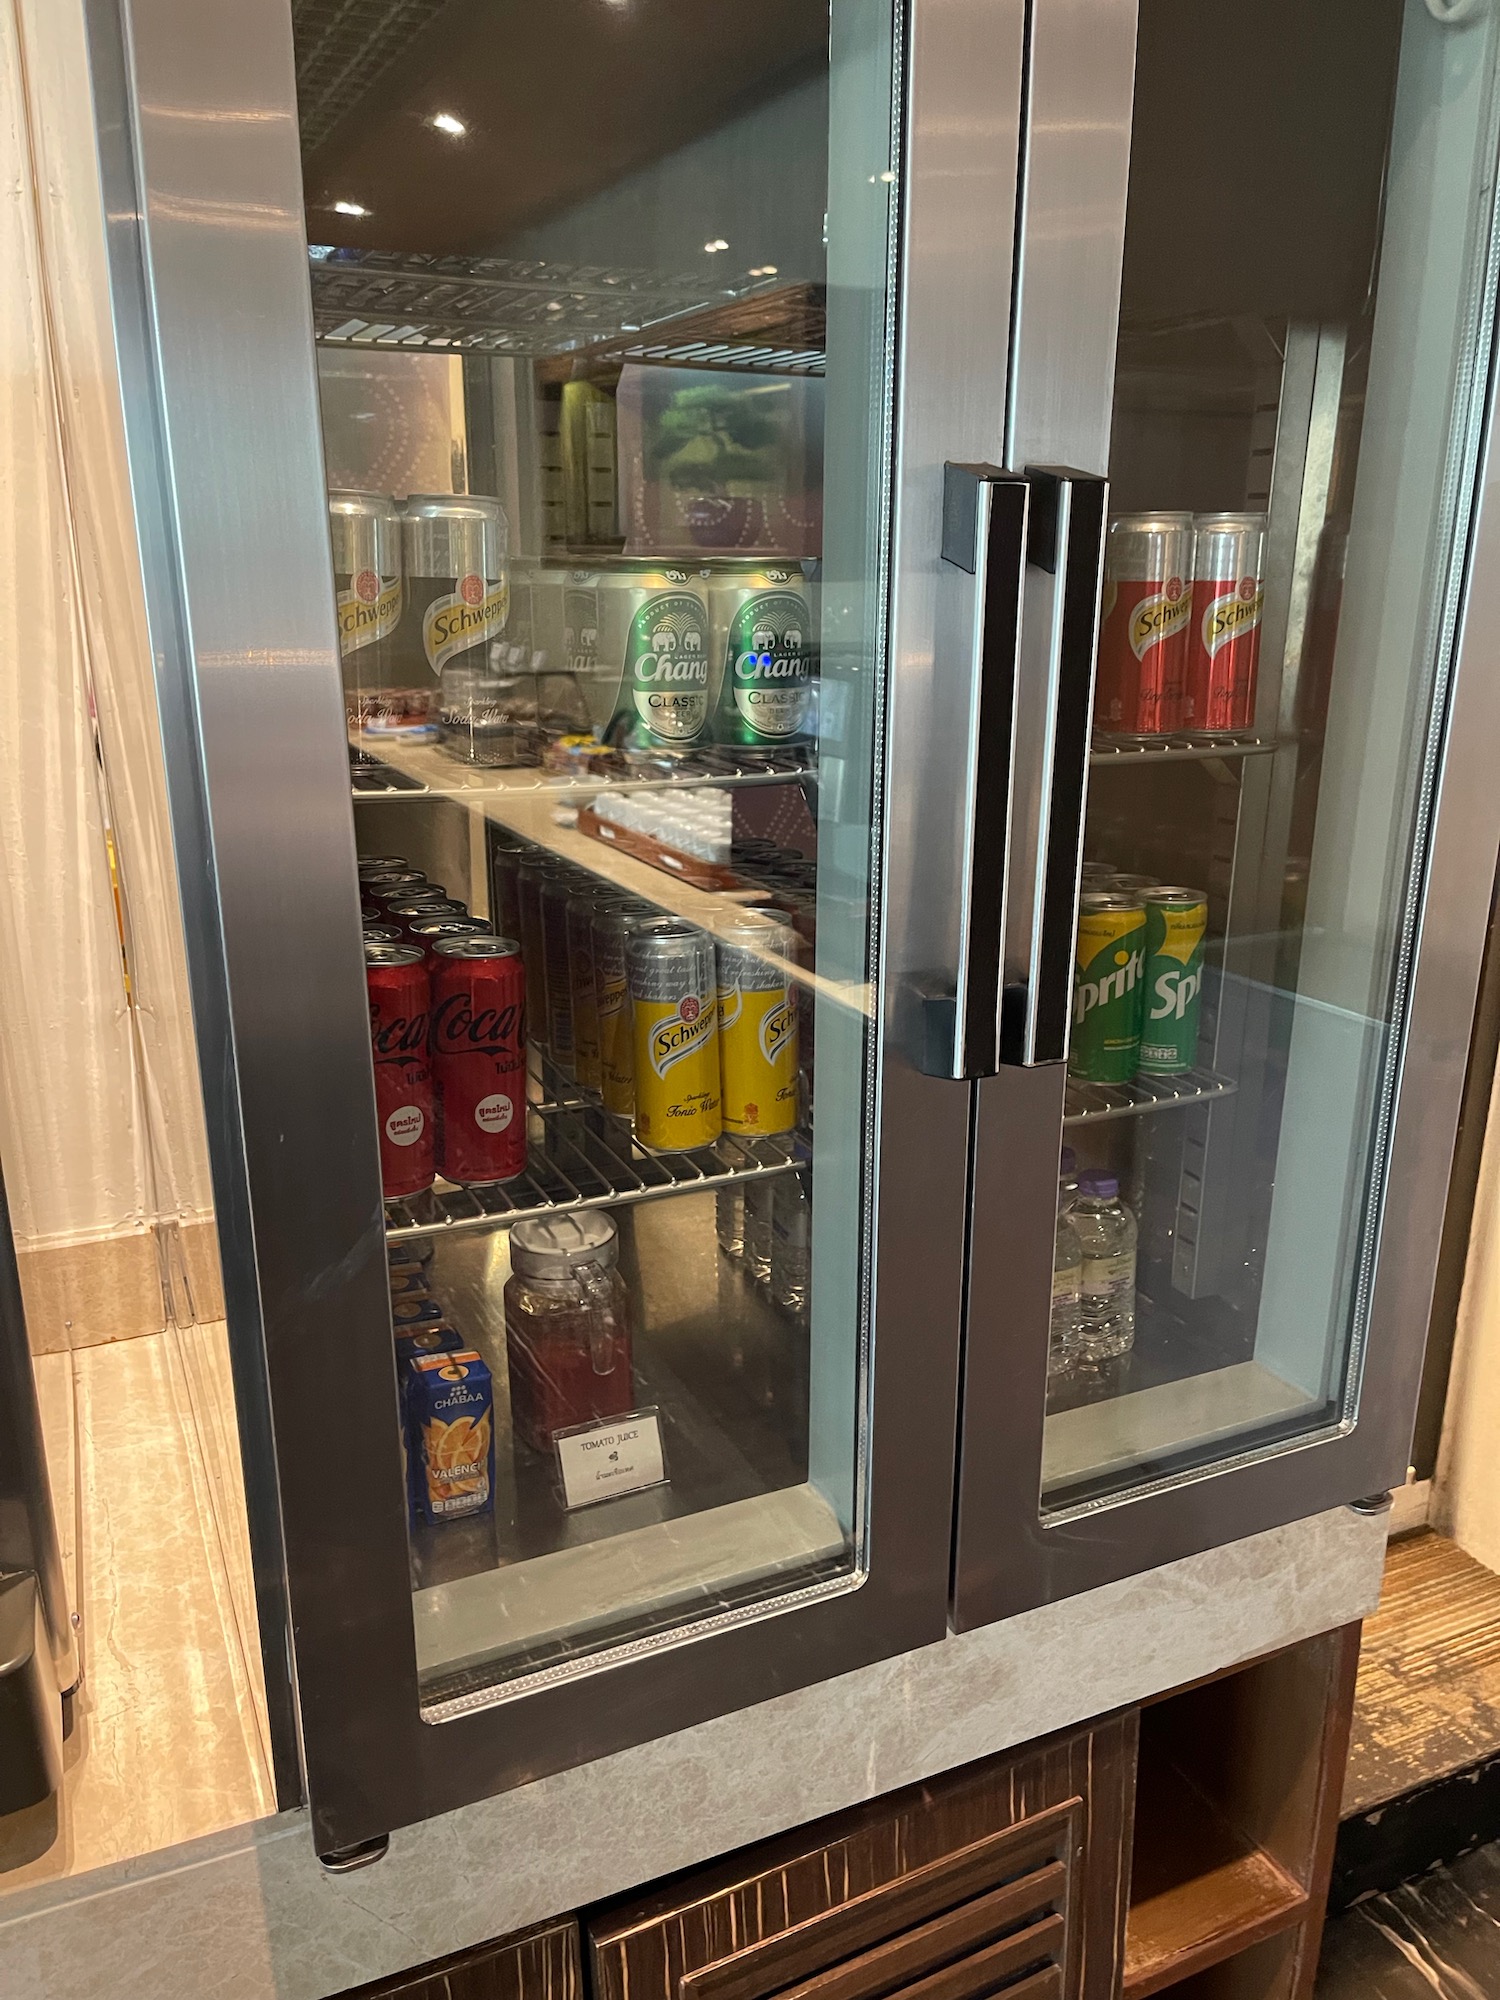 a refrigerator with cans and cans of soda